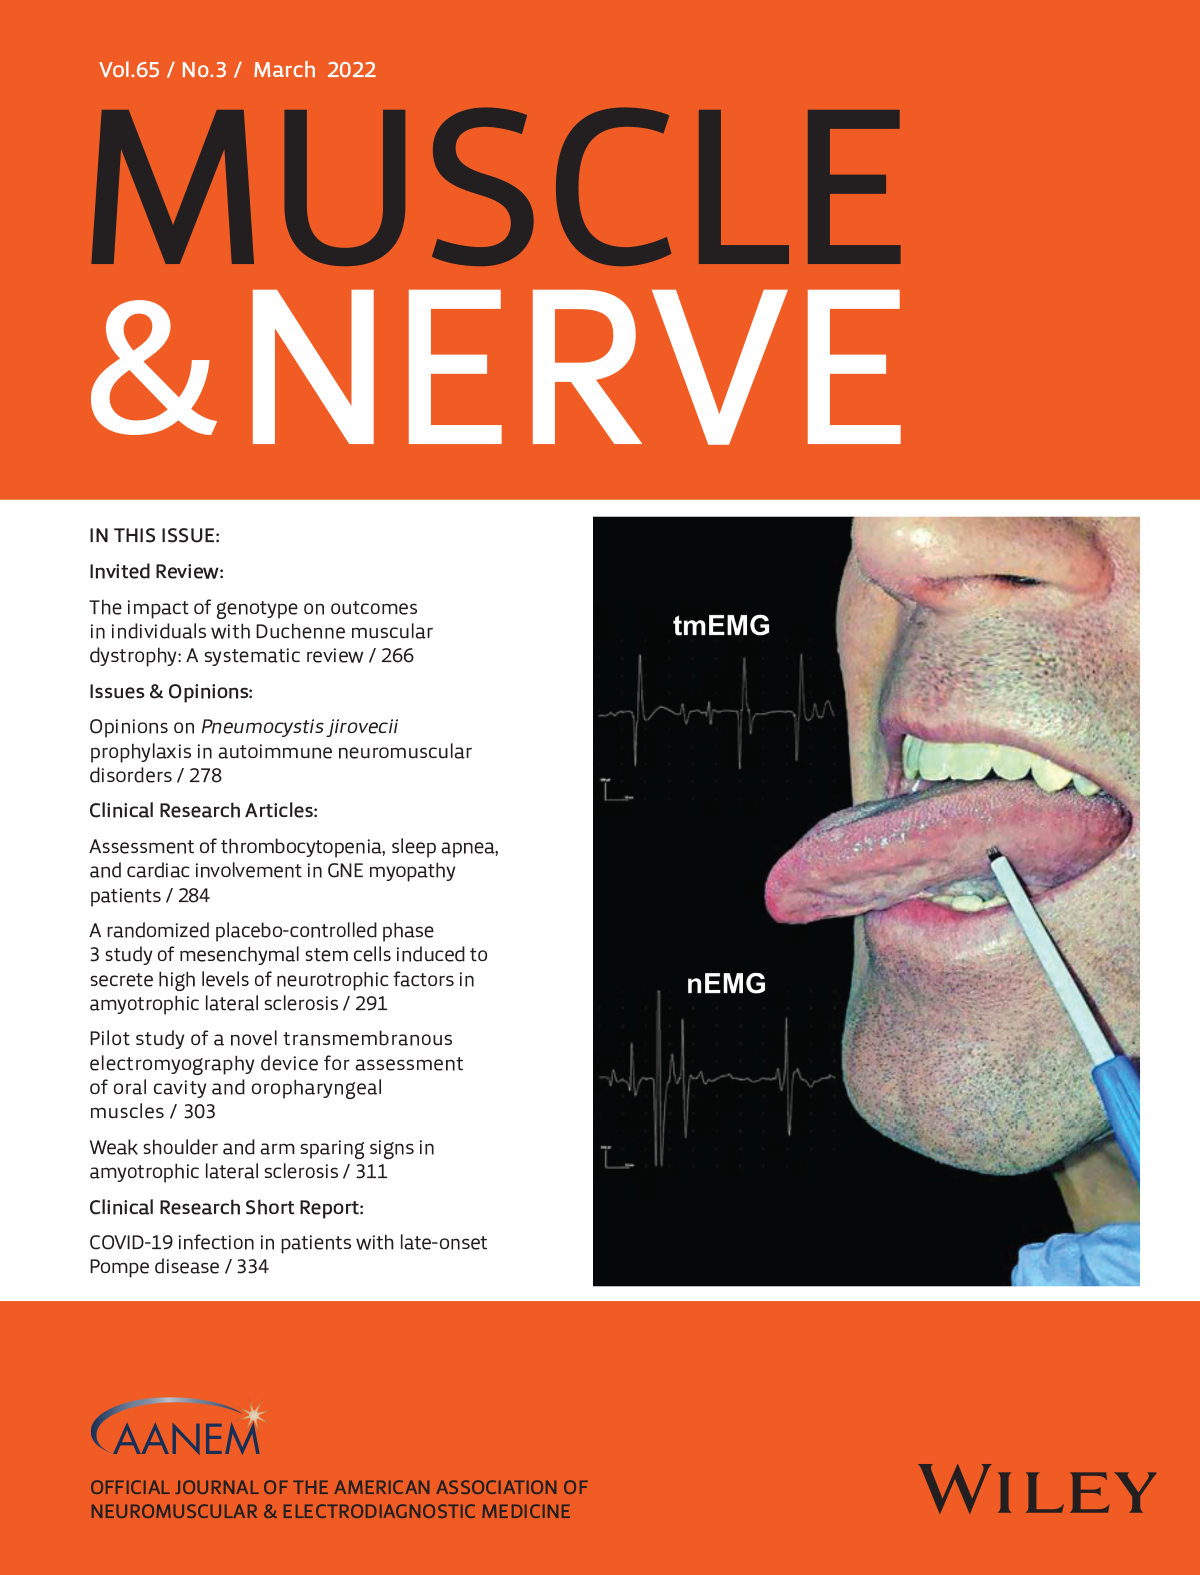 Cover of Muscle & Nerve Vol 65/No. 3, March 2022